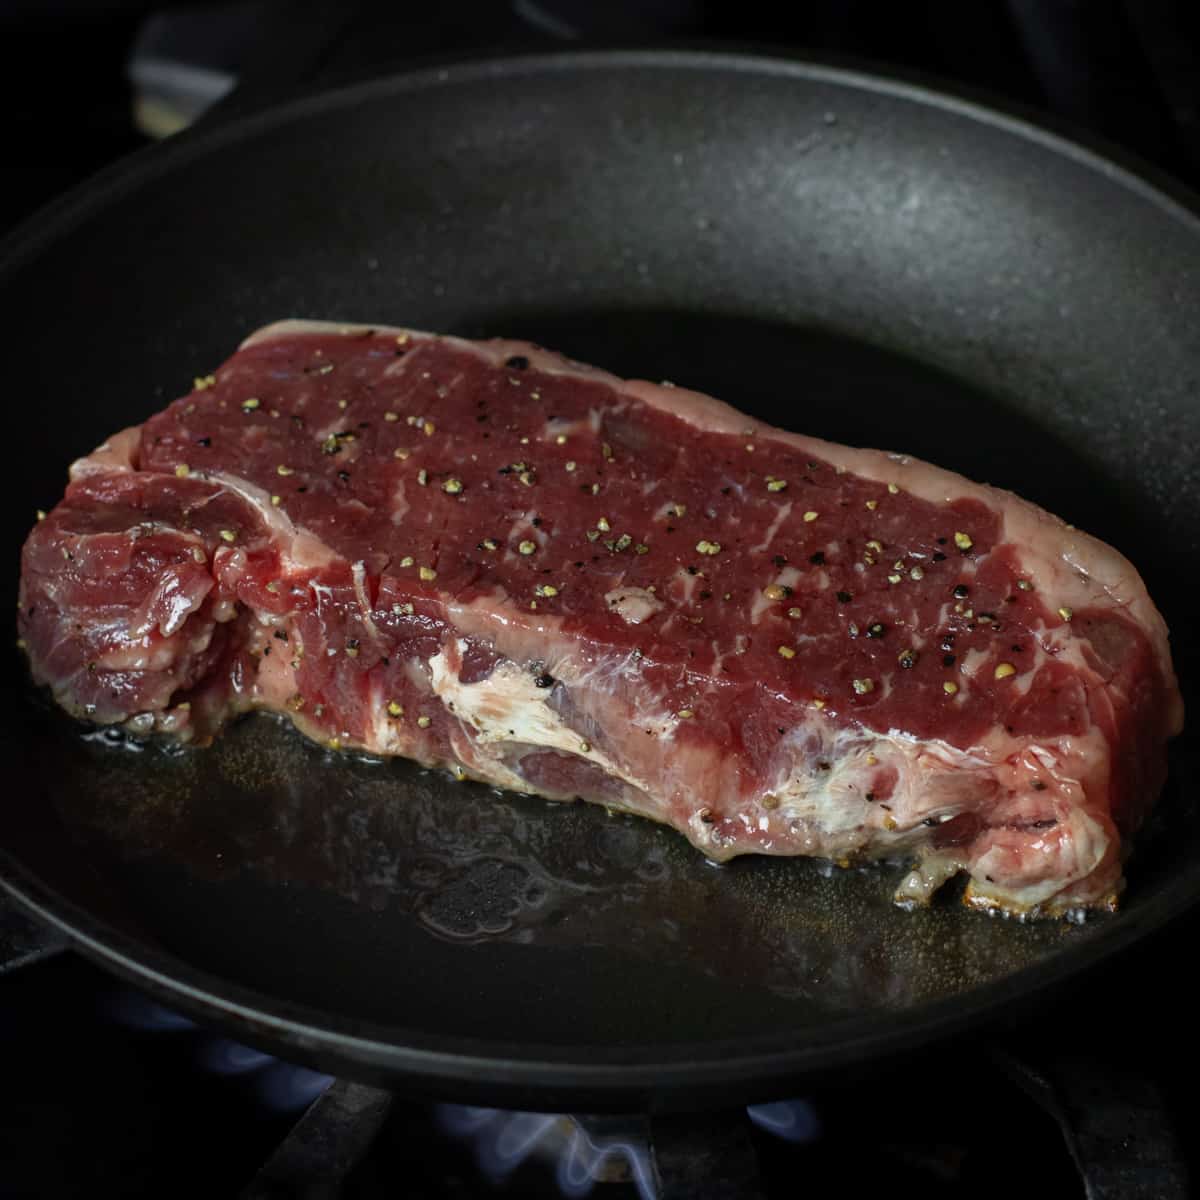 Raw steak placed on a hot frying pan.